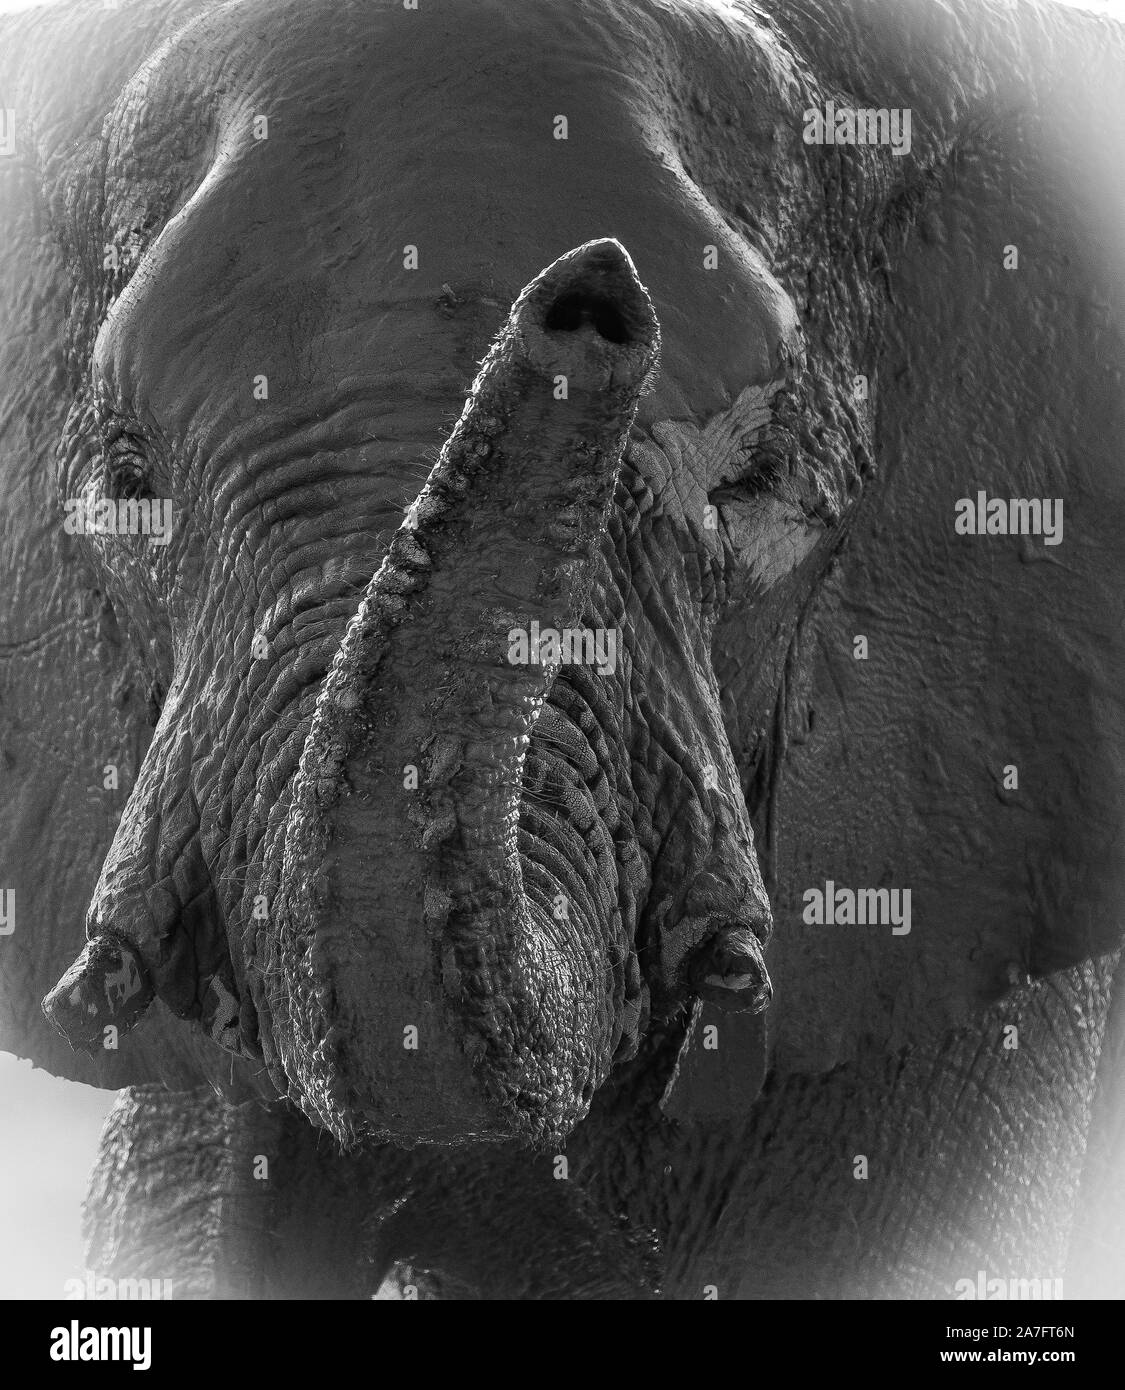 a black and white close up image of an elephant looking directly at the camera and scenting with its trunk Stock Photo